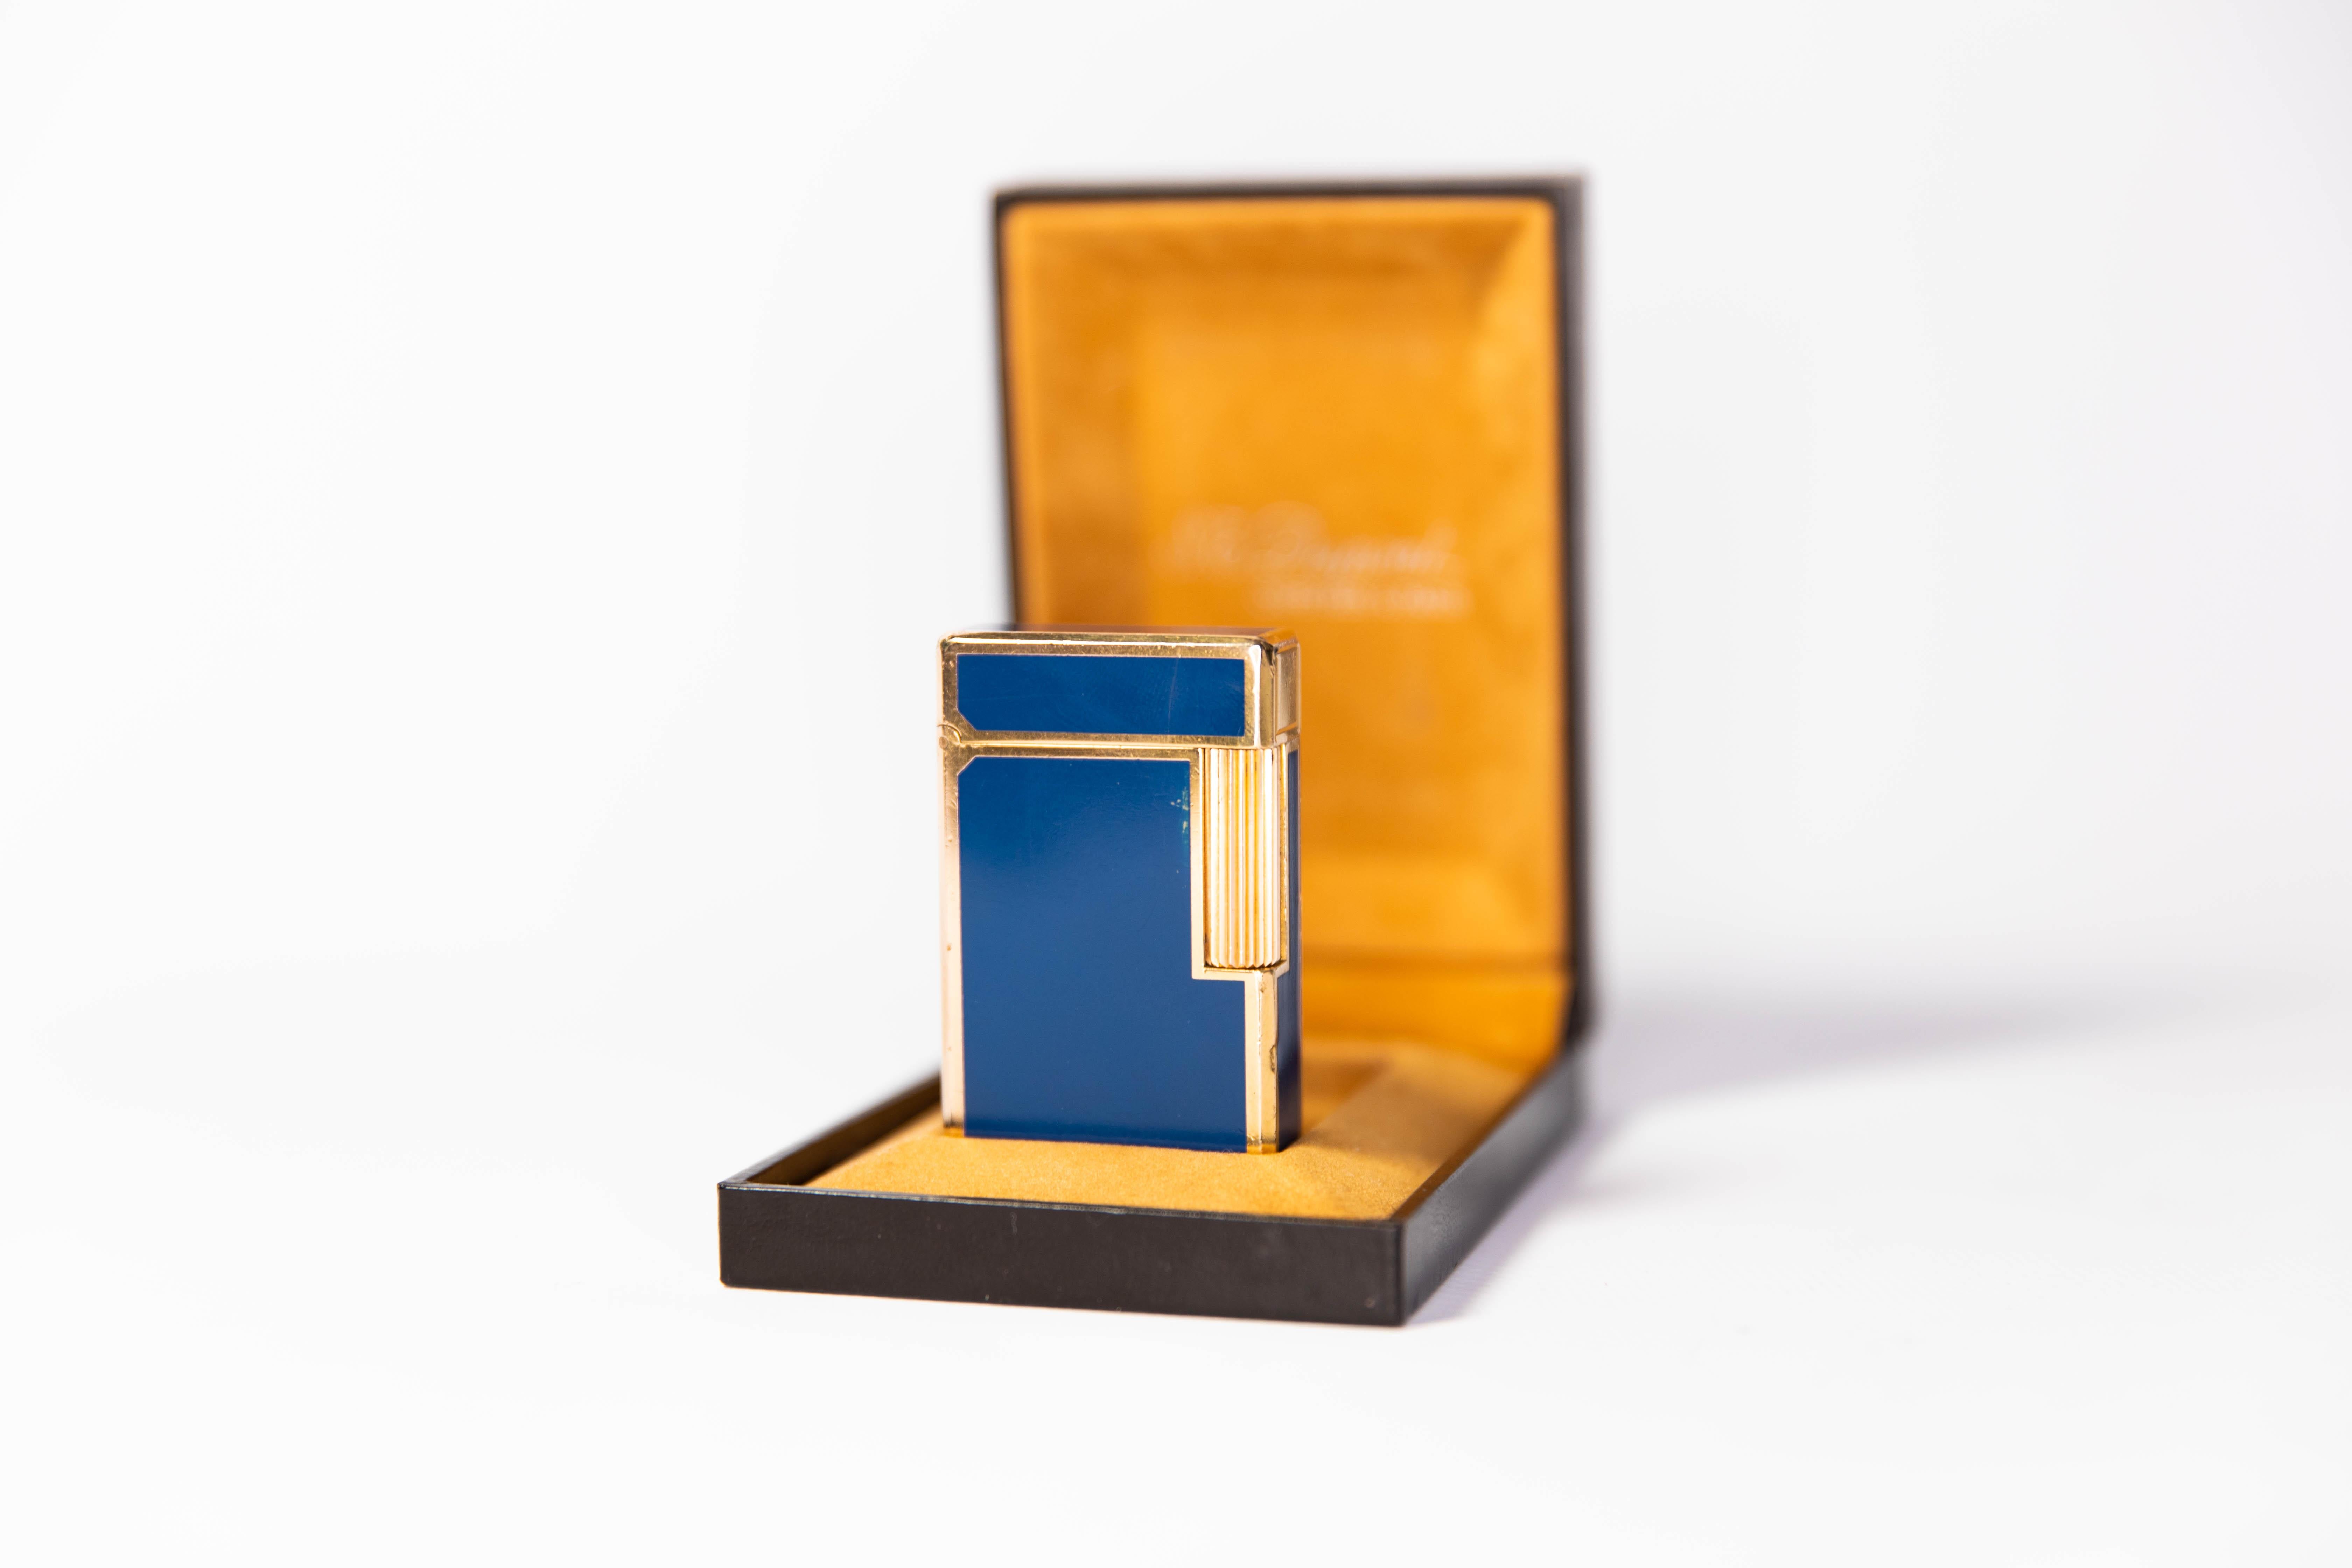 Vintage Gold Plated Ligne 1 BR ST Dupont Lighter Blue Laque de Chine 1980s In Box

The iconic S.T. Dupont name is known for quality, well-made cigarette lighters and other luxury implements. The company’s origin can be traced to Simon Tissot-Dupont